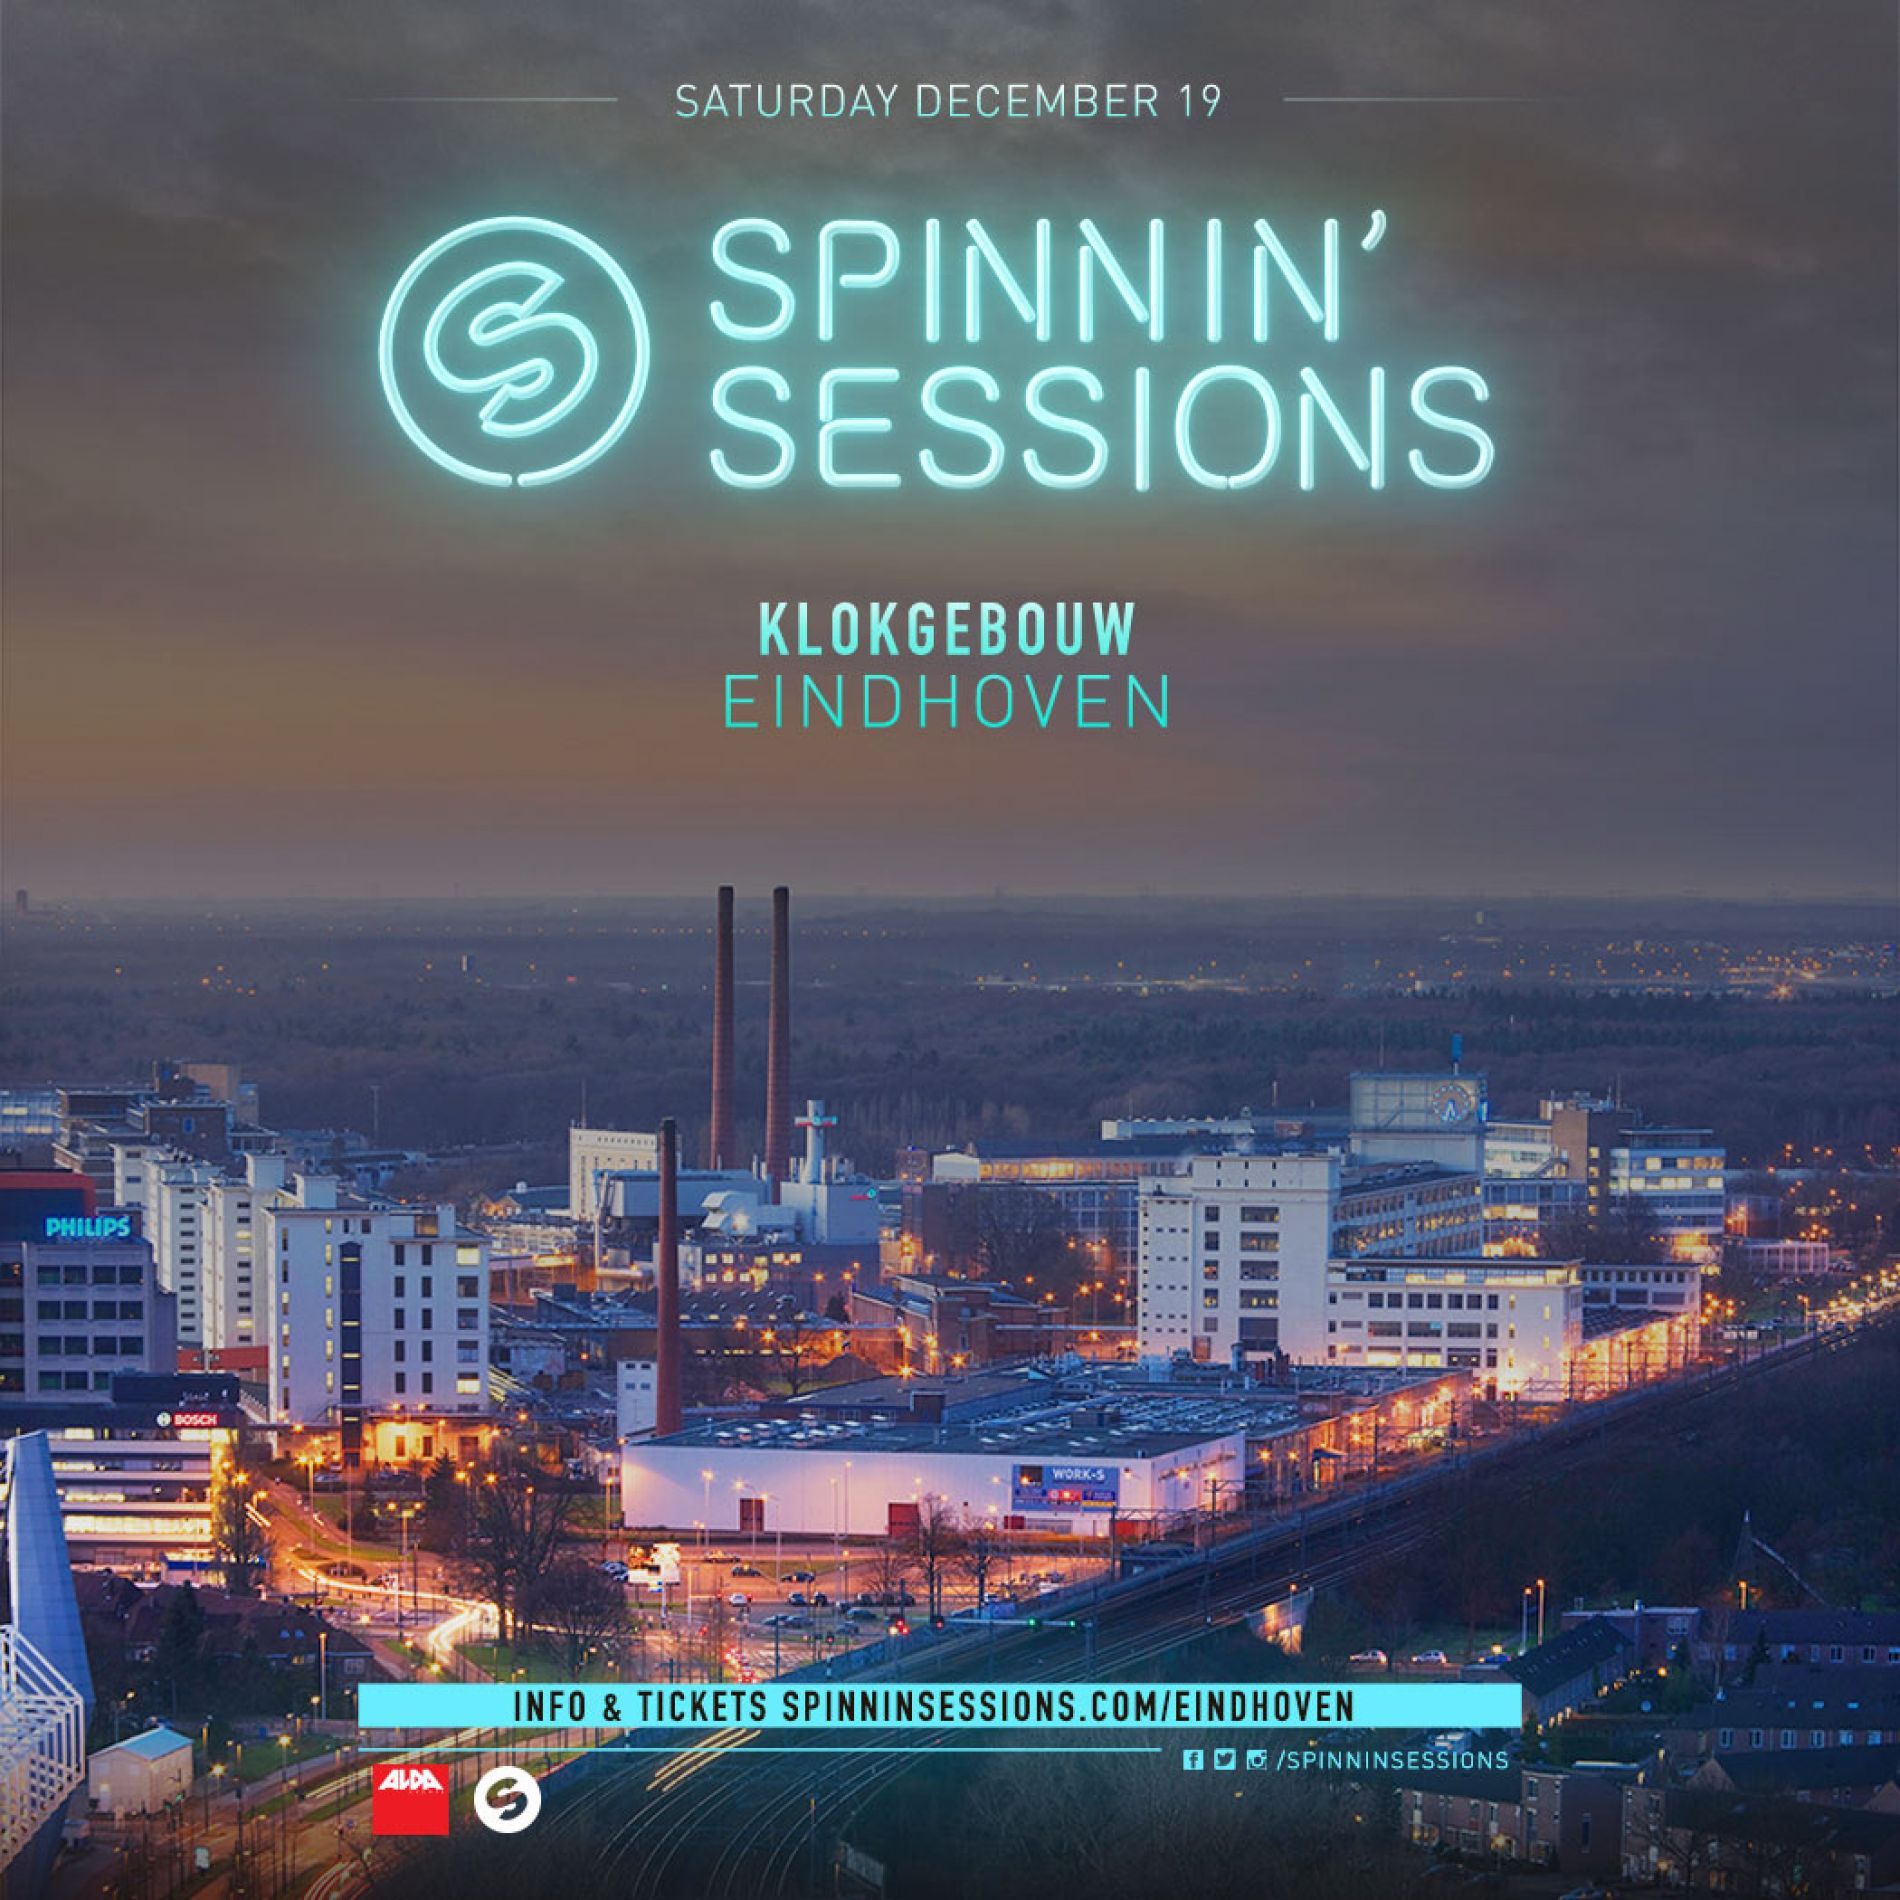 Spinnin' Sessions Spinnin' Sessions Eindhoven